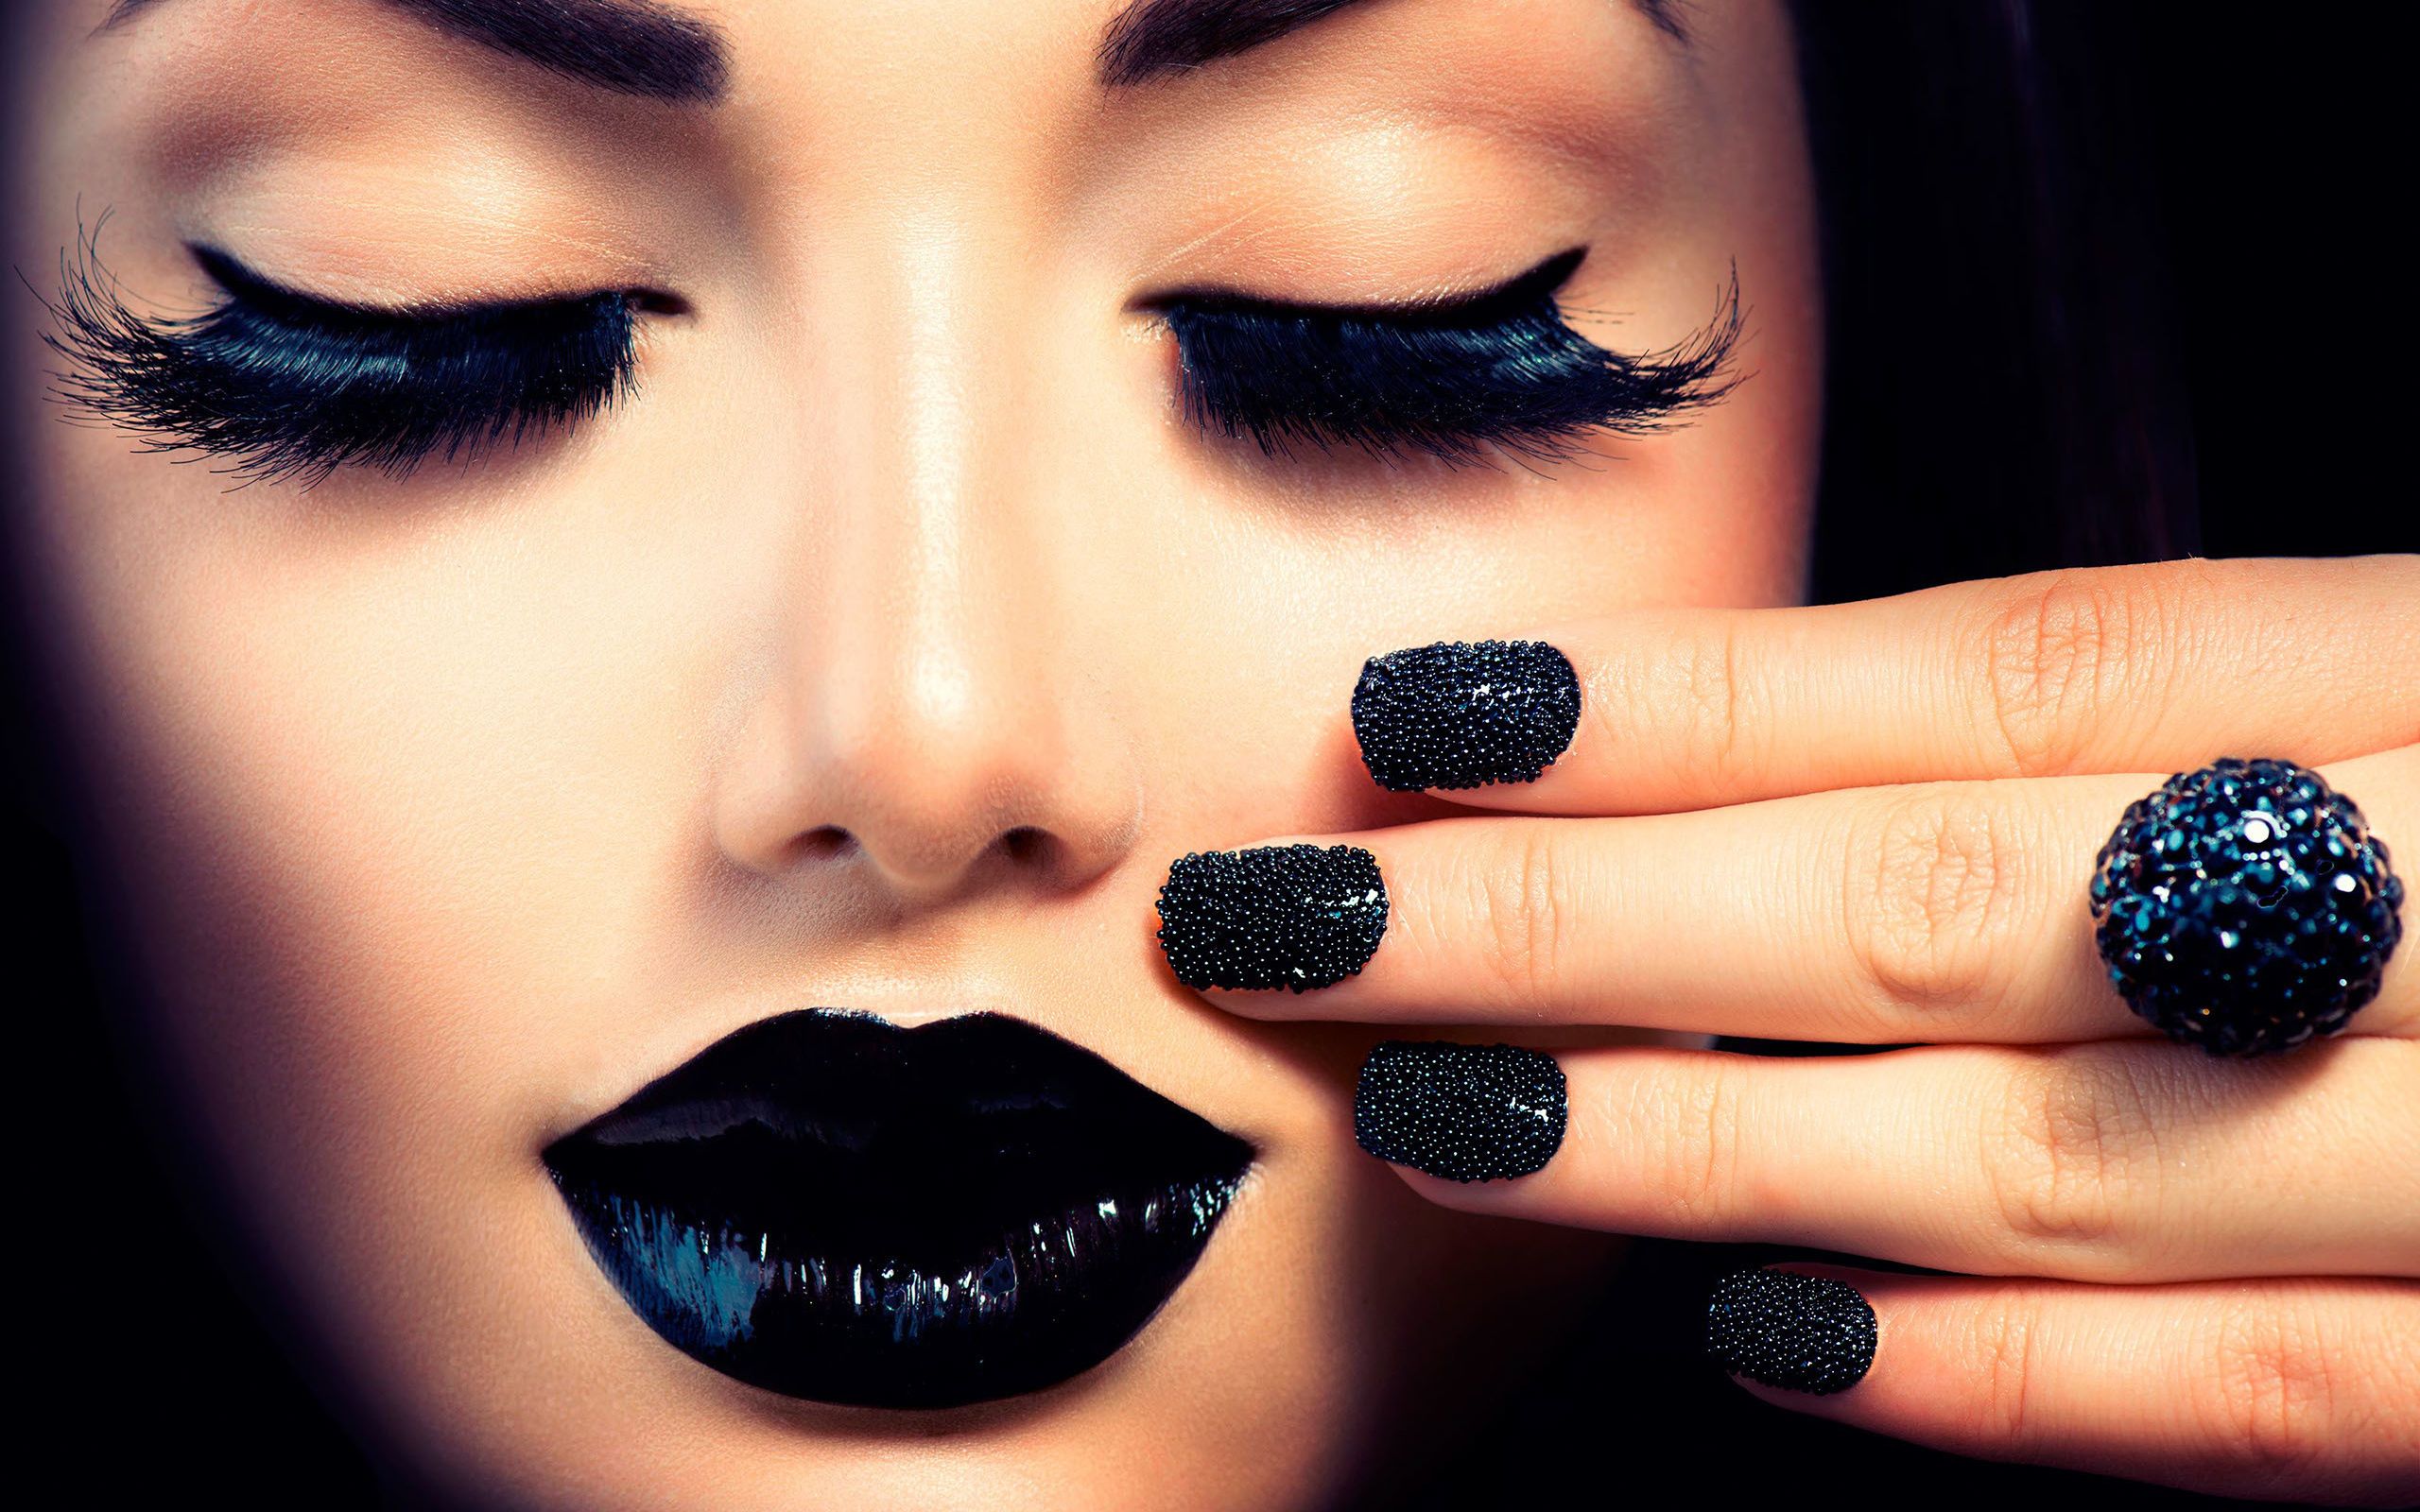 Black Nails Aesthetic Wallpapers